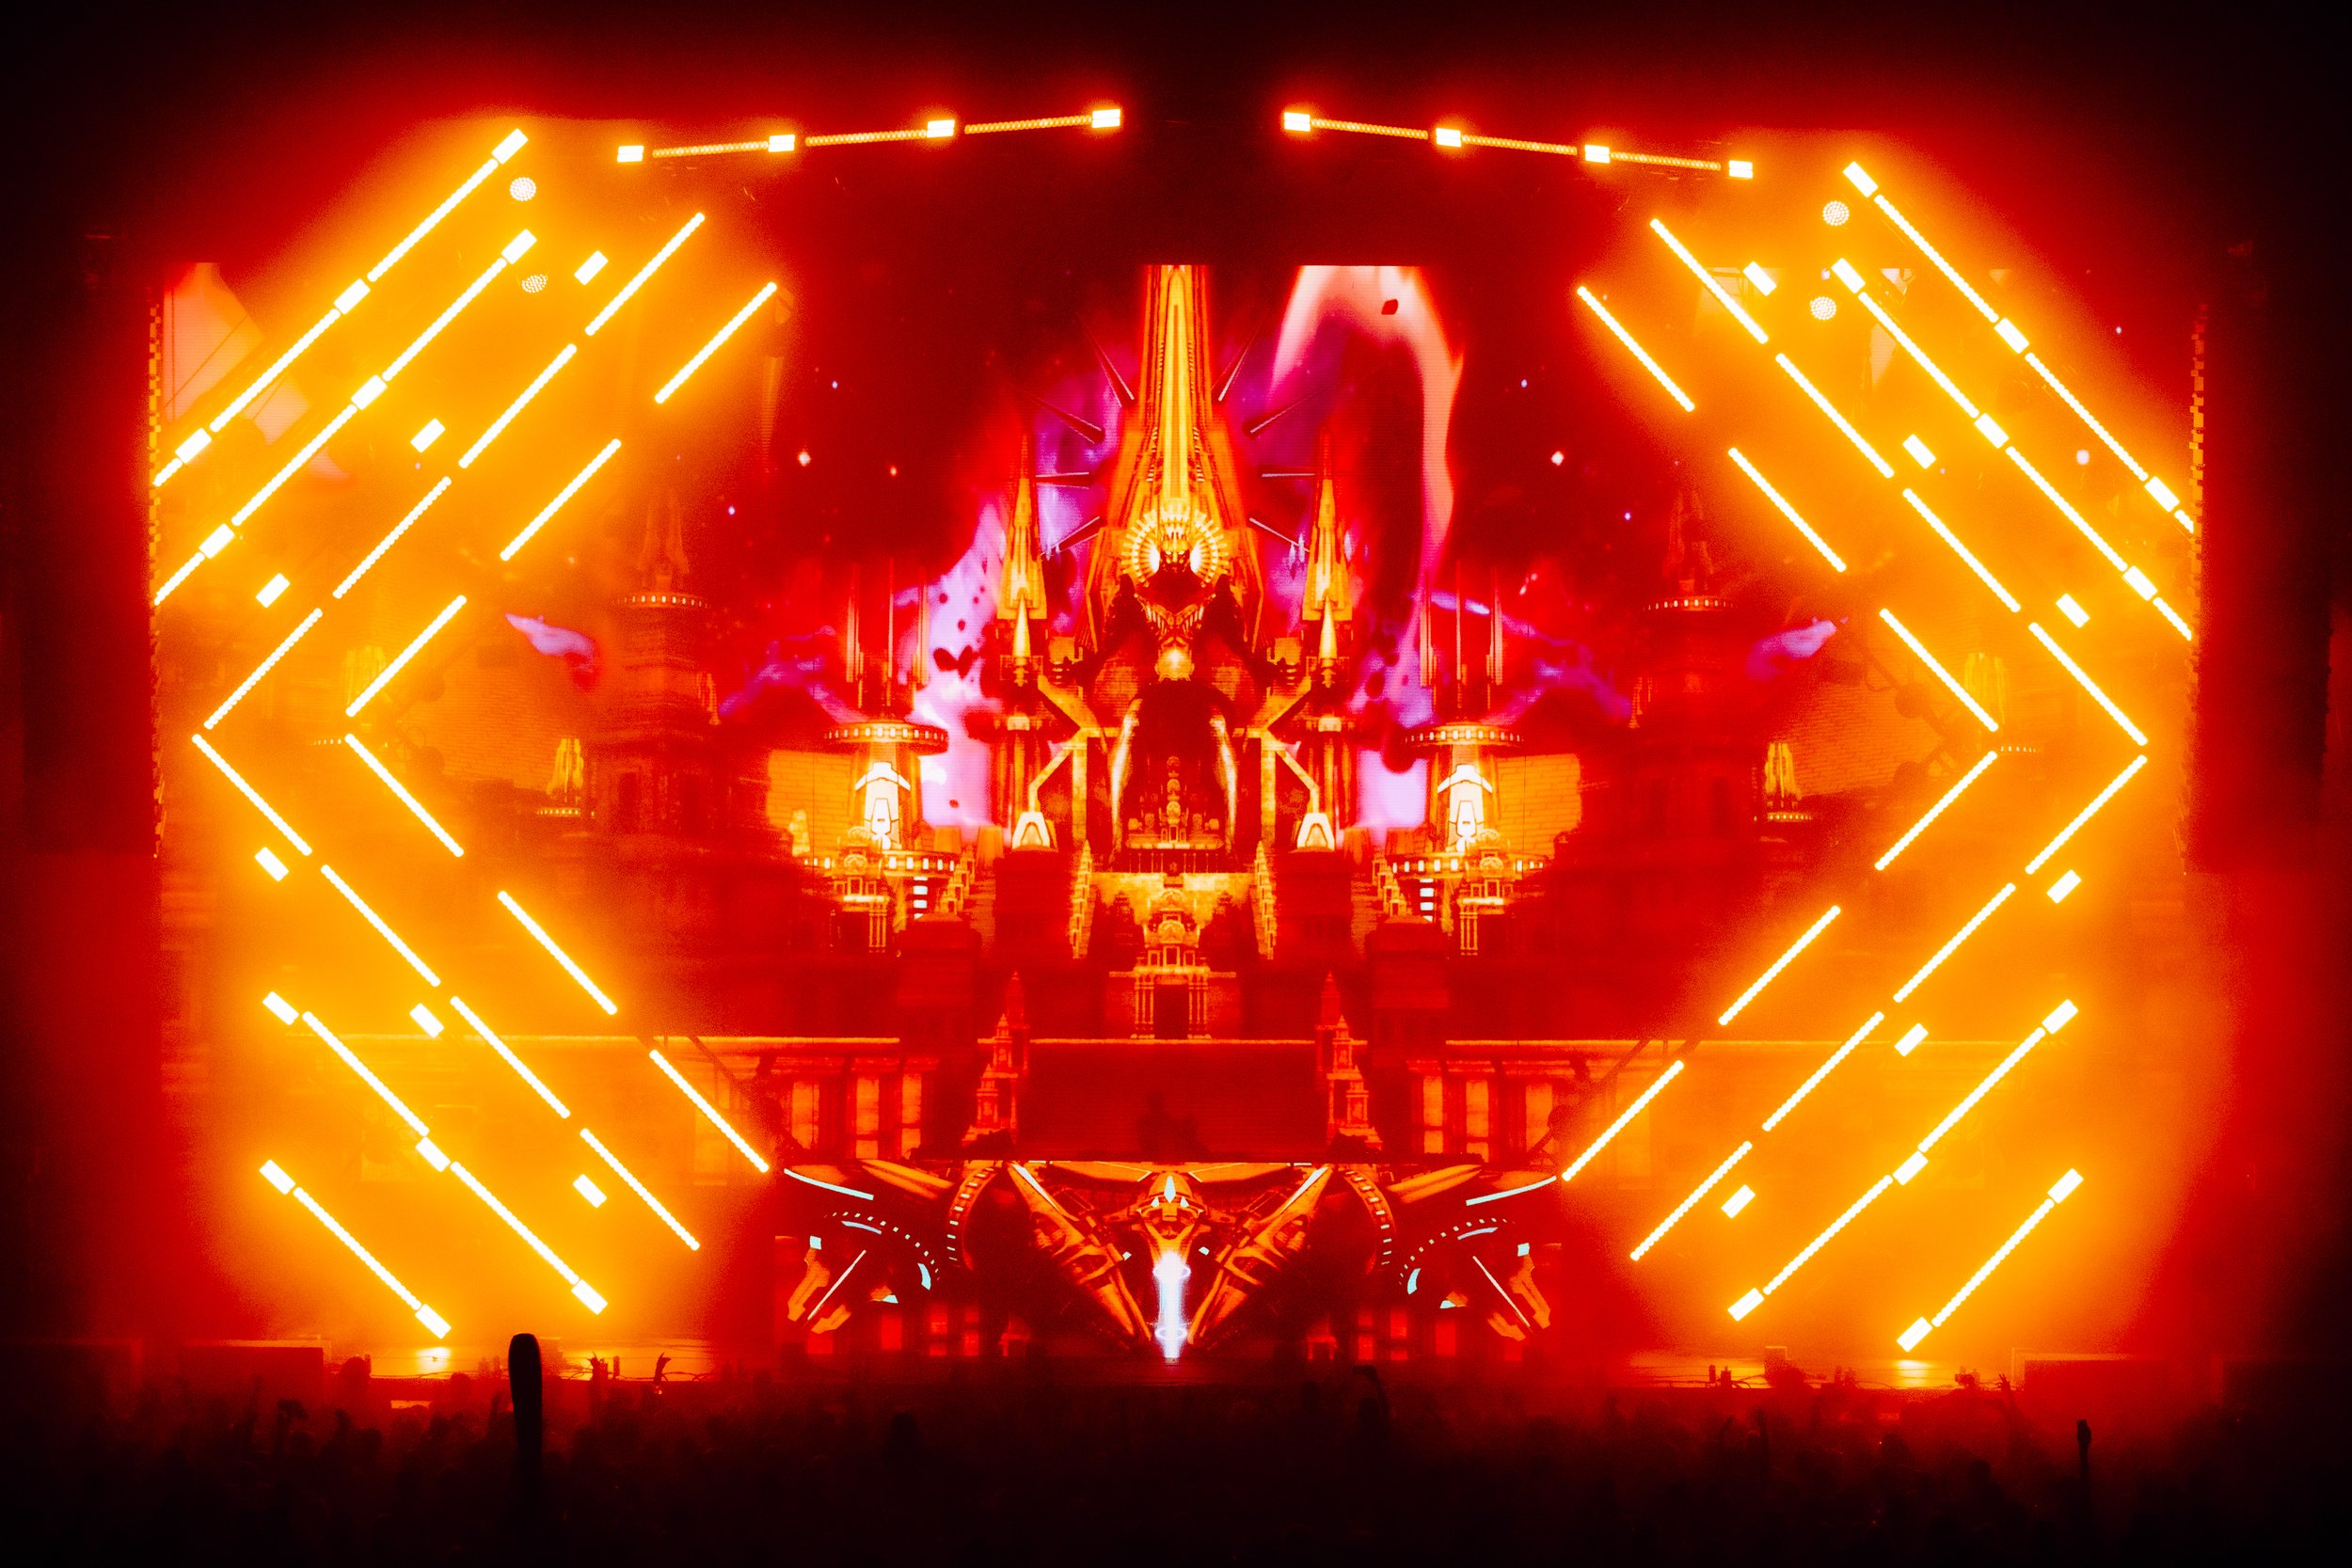 Excision - MILE HIGH DENVER NIGHT ONE-1stBank Center-Broomfield, Colorado-Friday, March 18, 2022 - PHOTO BY Mowgli Miles of Interracial Friends-23.JPG